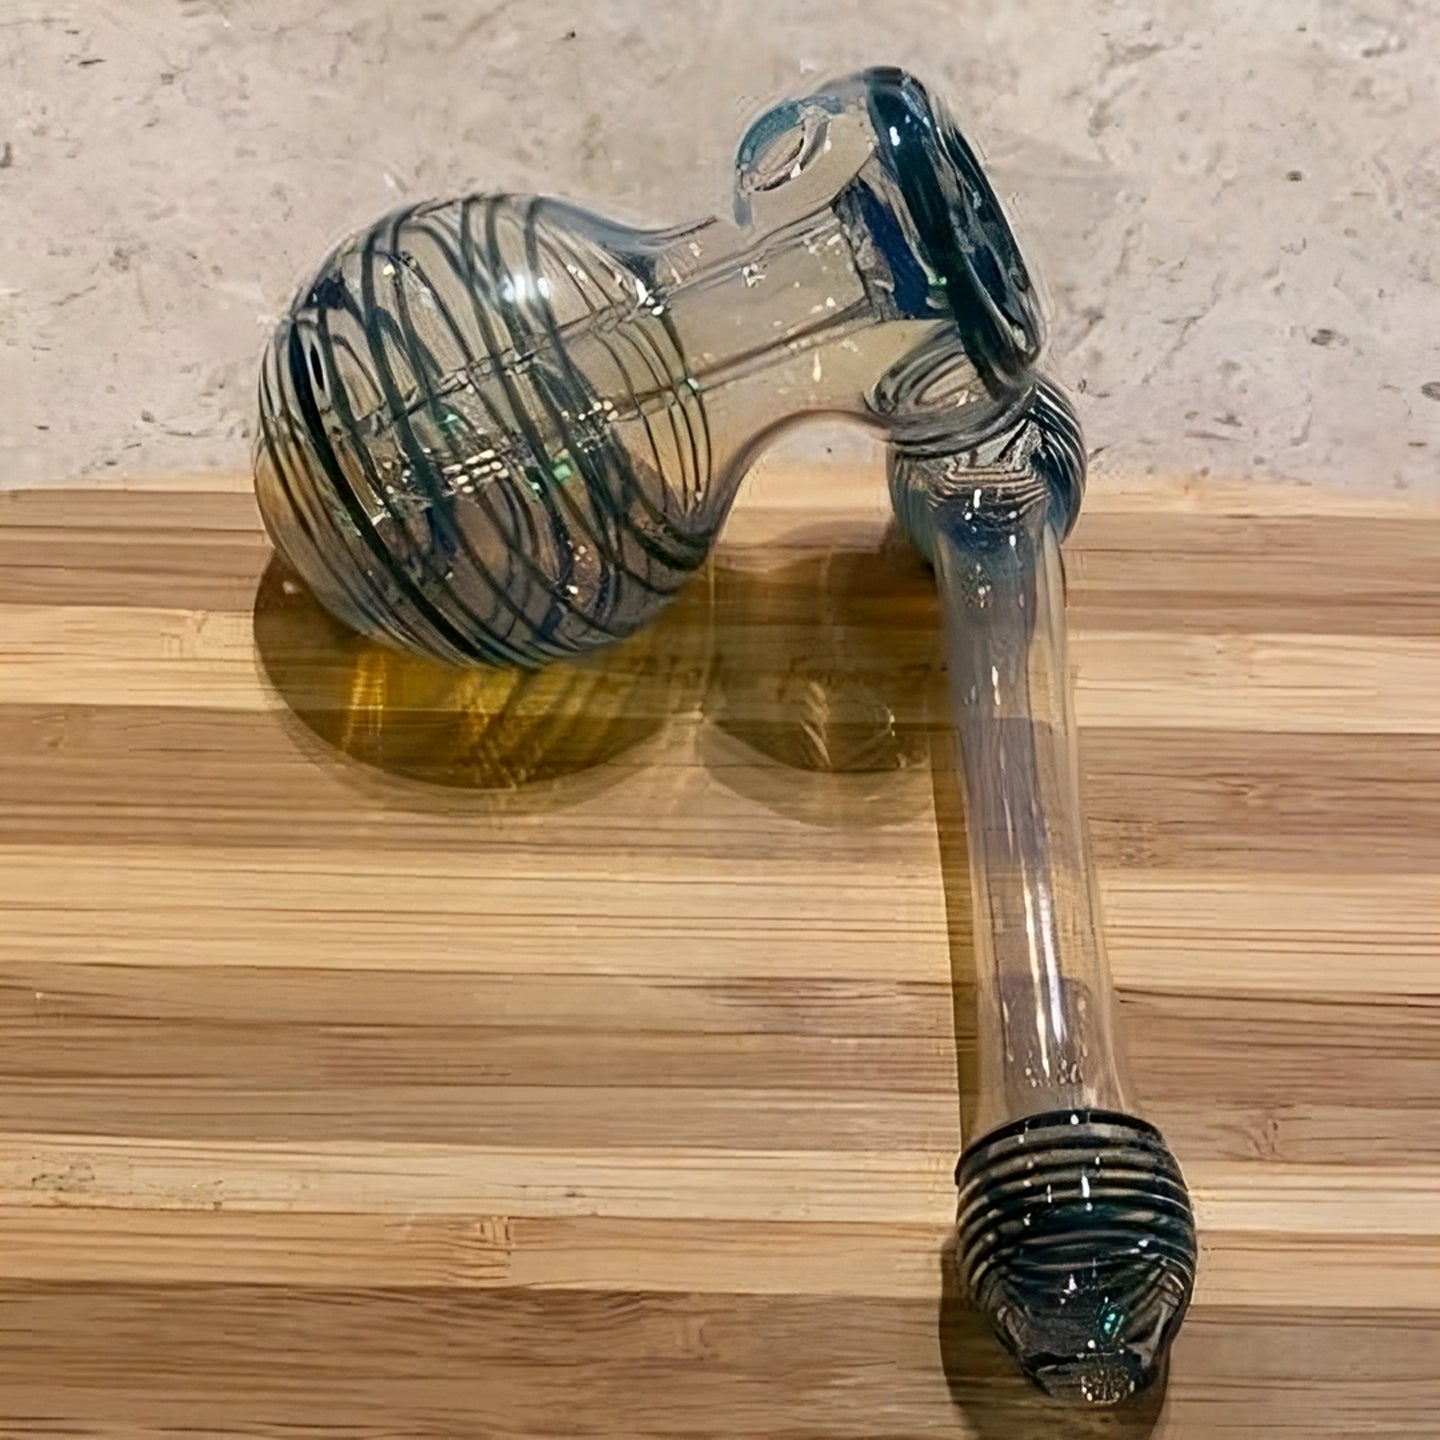 Sidecar Bubbler Water Pipe 6" Striped Green White and Black Accents By SMG